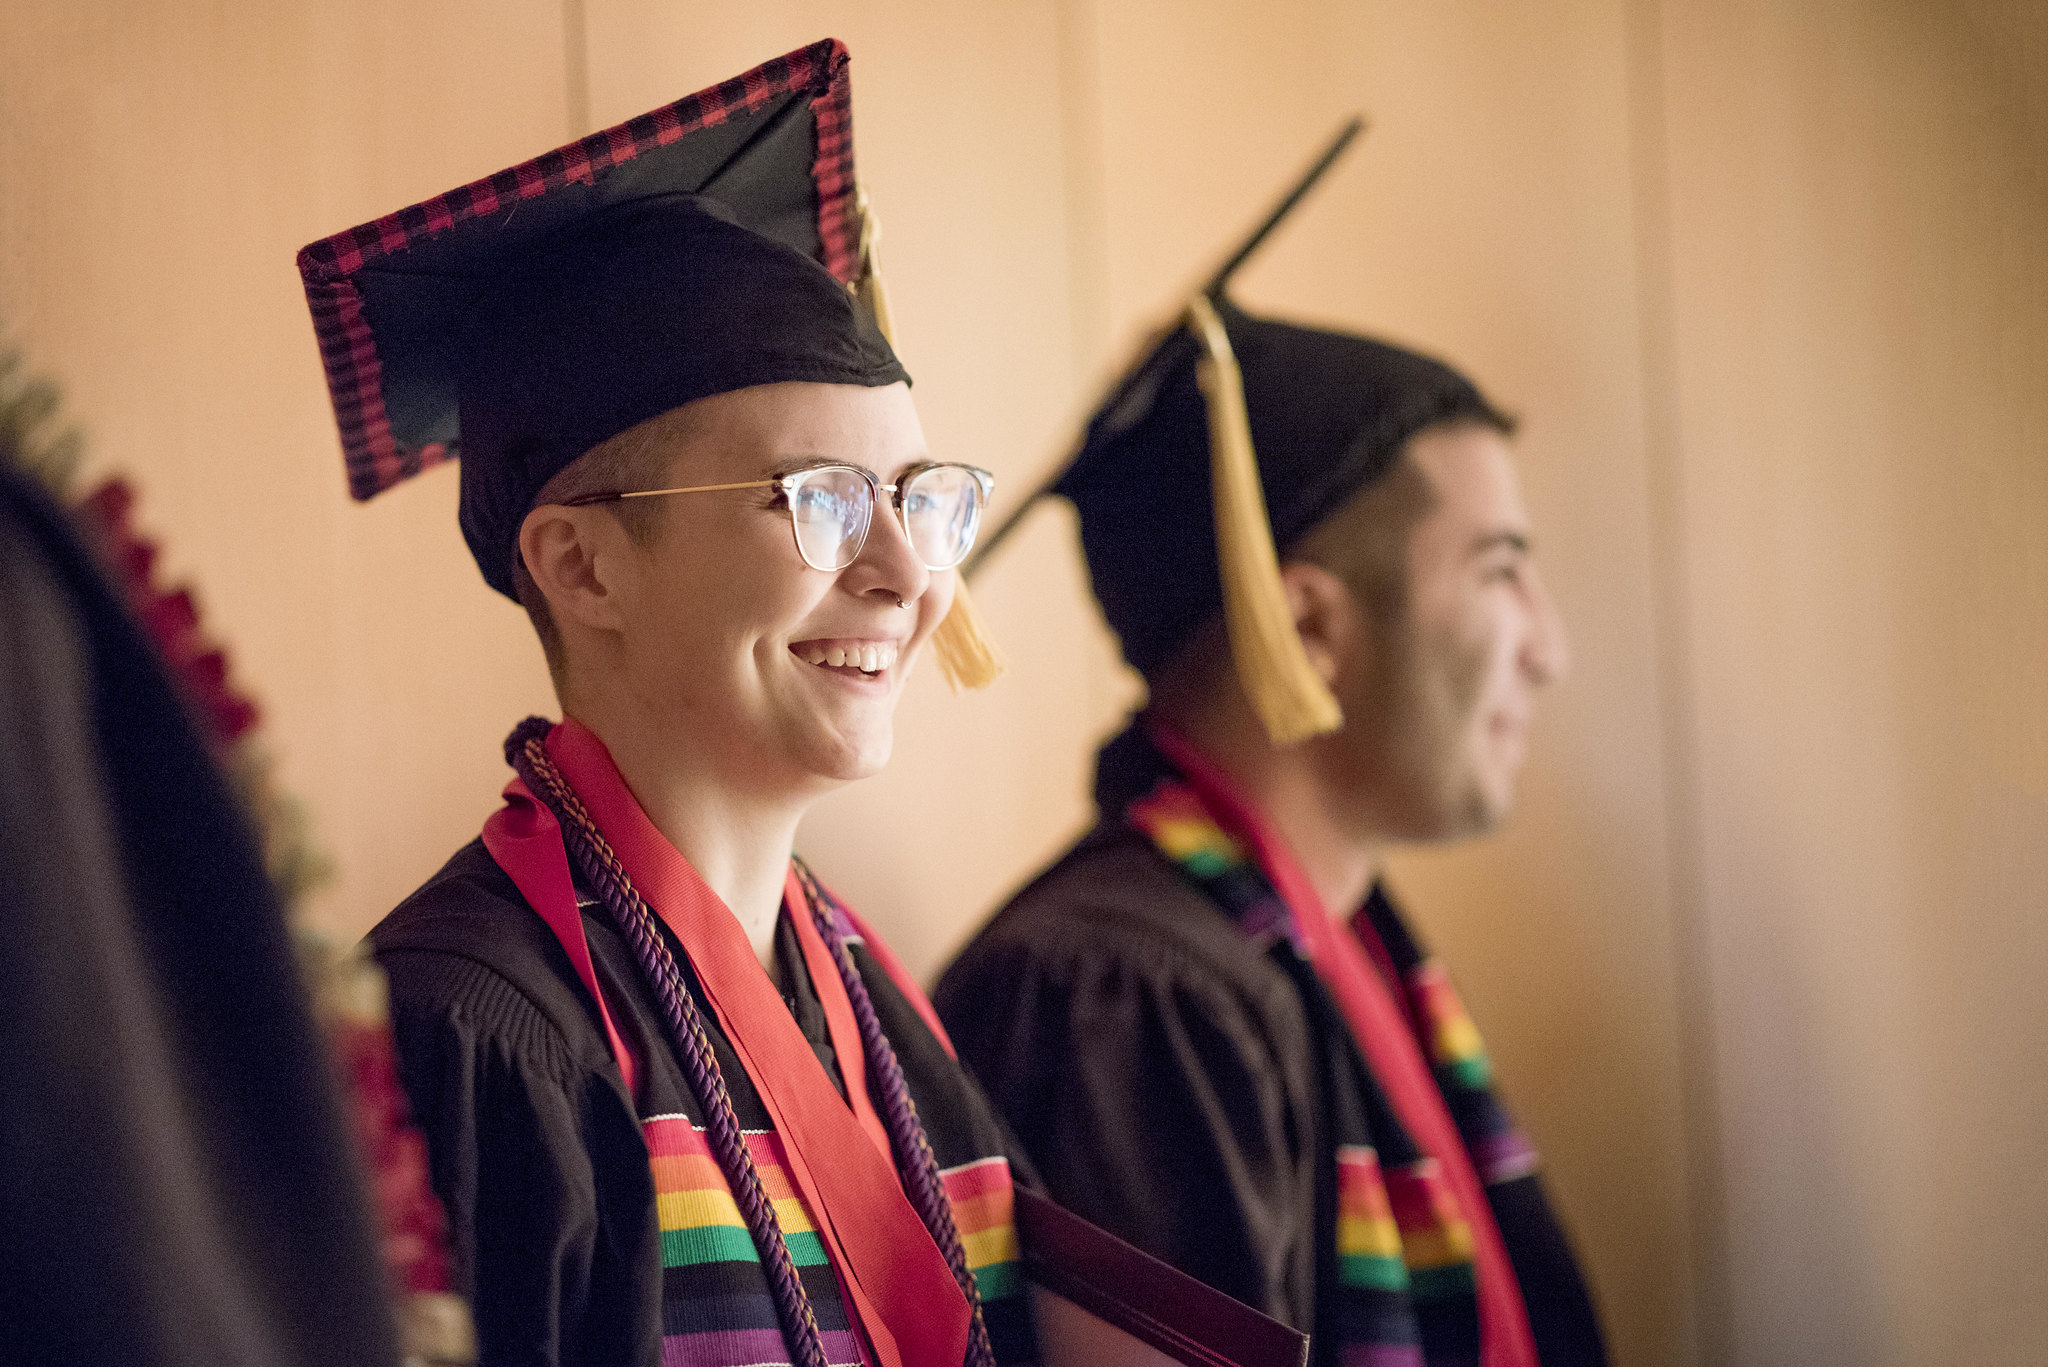 Two students wearing academic robes smile